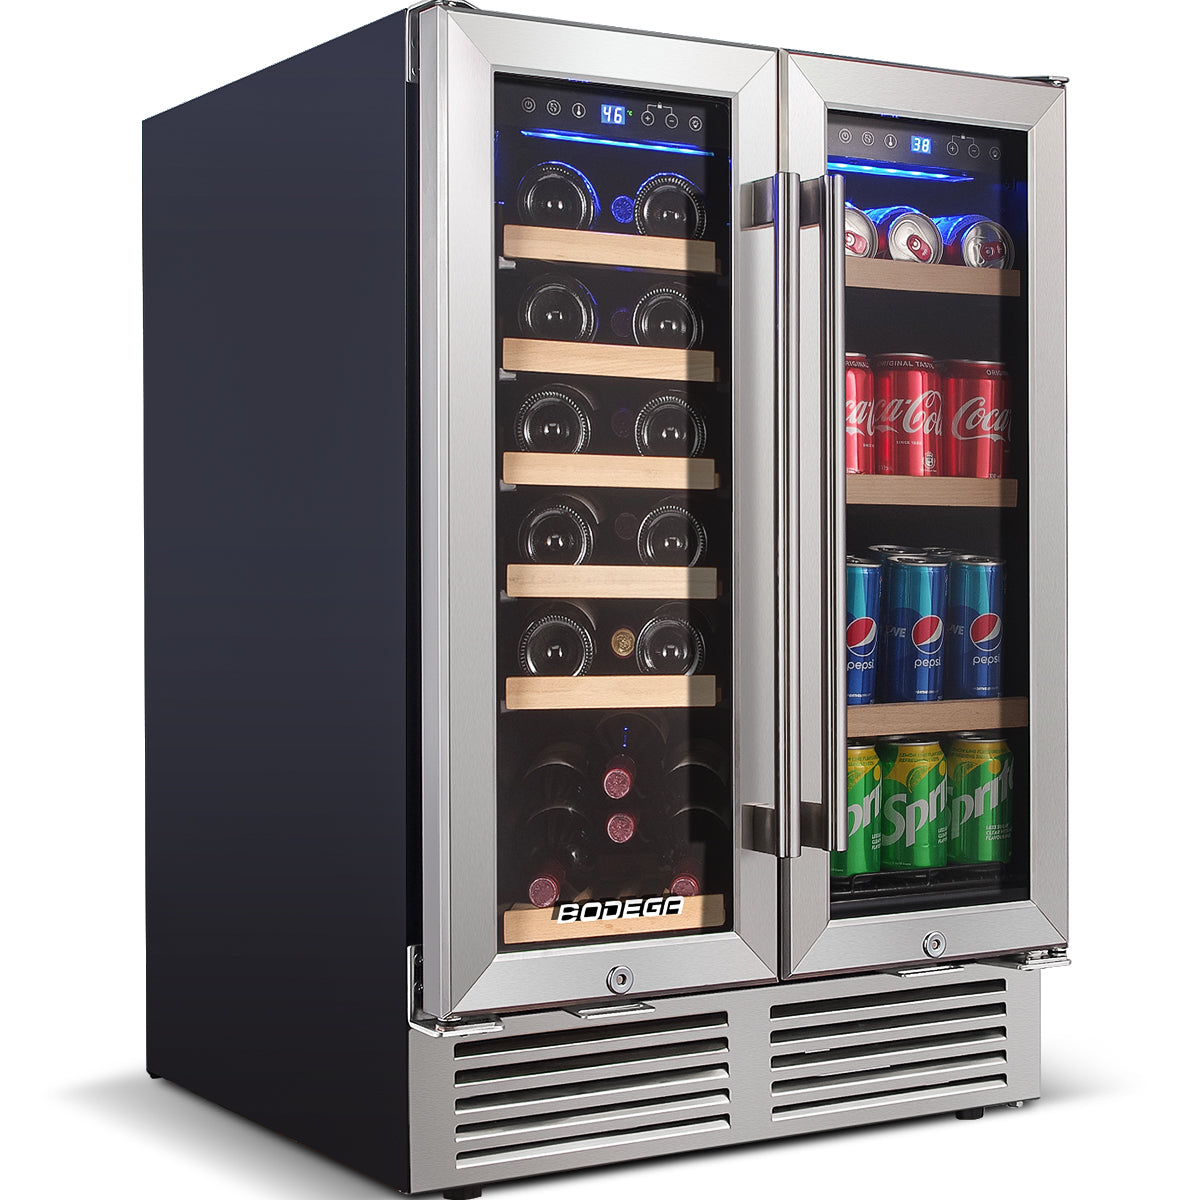 15 inch 28 Bottle / 88 Cans Capacity Built-In or Free Standing Wine Cooler Under Counter Metal Beverage Fridge Cabinet, with LED Lighting